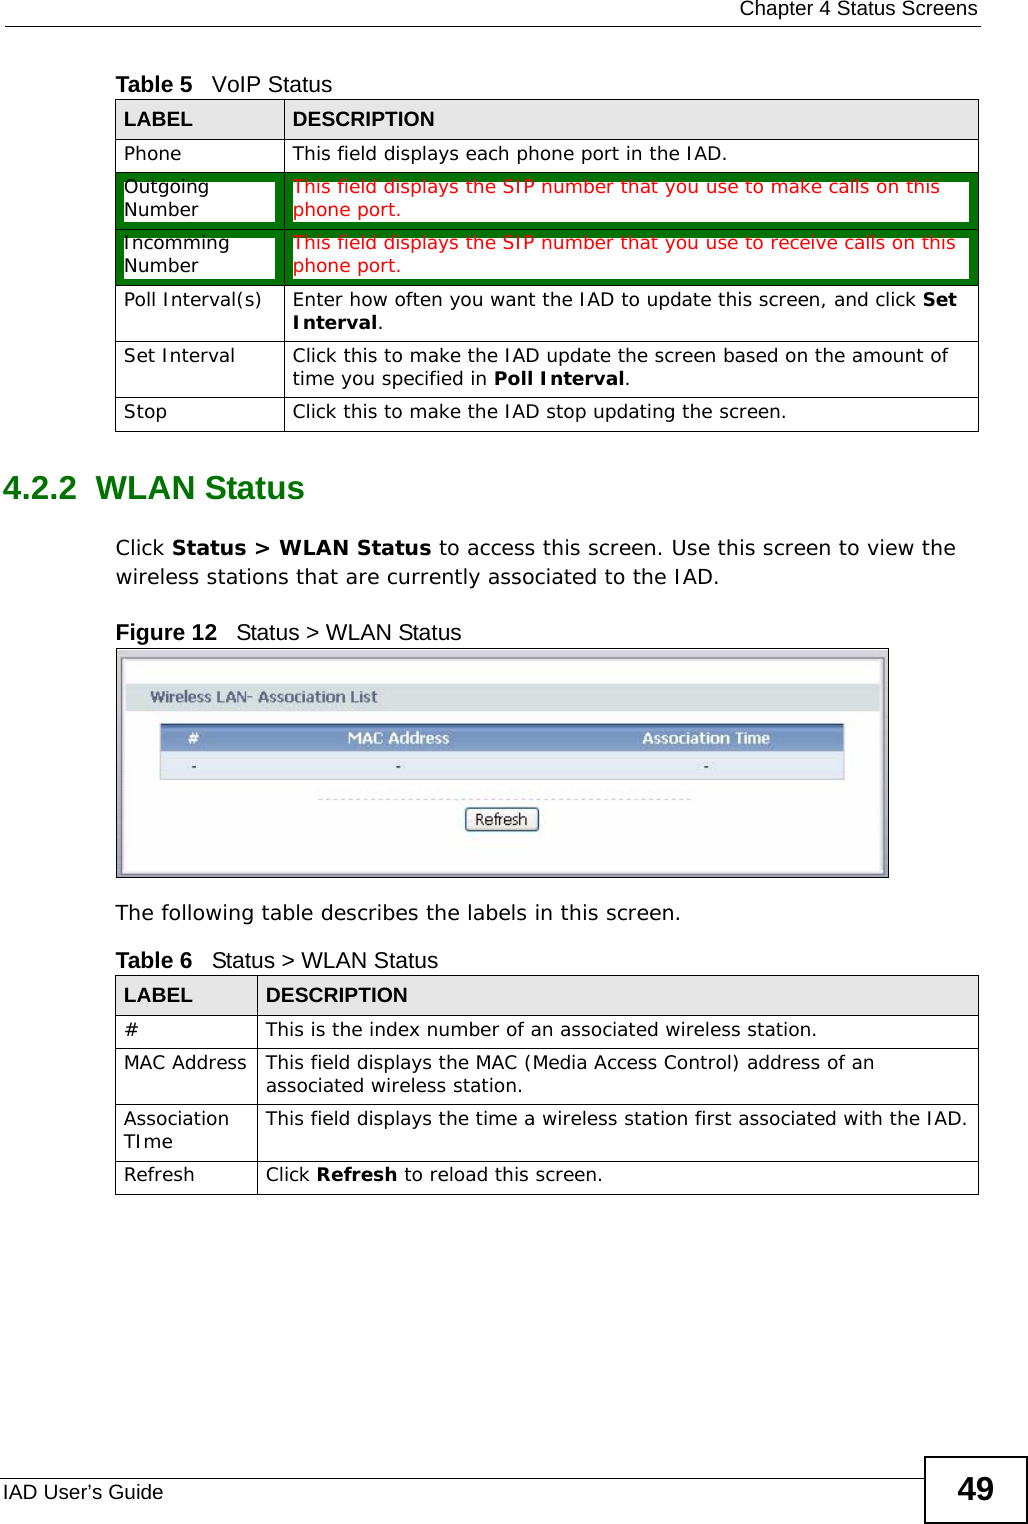  Chapter 4 Status ScreensIAD User’s Guide 494.2.2  WLAN StatusClick Status &gt; WLAN Status to access this screen. Use this screen to view the wireless stations that are currently associated to the IAD.Figure 12   Status &gt; WLAN StatusThe following table describes the labels in this screen.Phone This field displays each phone port in the IAD.Outgoing Number  This field displays the SIP number that you use to make calls on this phone port.Incomming Number  This field displays the SIP number that you use to receive calls on this phone port.Poll Interval(s) Enter how often you want the IAD to update this screen, and click Set Interval.Set Interval Click this to make the IAD update the screen based on the amount of time you specified in Poll Interval.Stop Click this to make the IAD stop updating the screen.Table 5   VoIP Status LABEL DESCRIPTIONTable 6   Status &gt; WLAN StatusLABEL  DESCRIPTION#  This is the index number of an associated wireless station. MAC Address This field displays the MAC (Media Access Control) address of an associated wireless station.Association TIme This field displays the time a wireless station first associated with the IAD.Refresh Click Refresh to reload this screen.